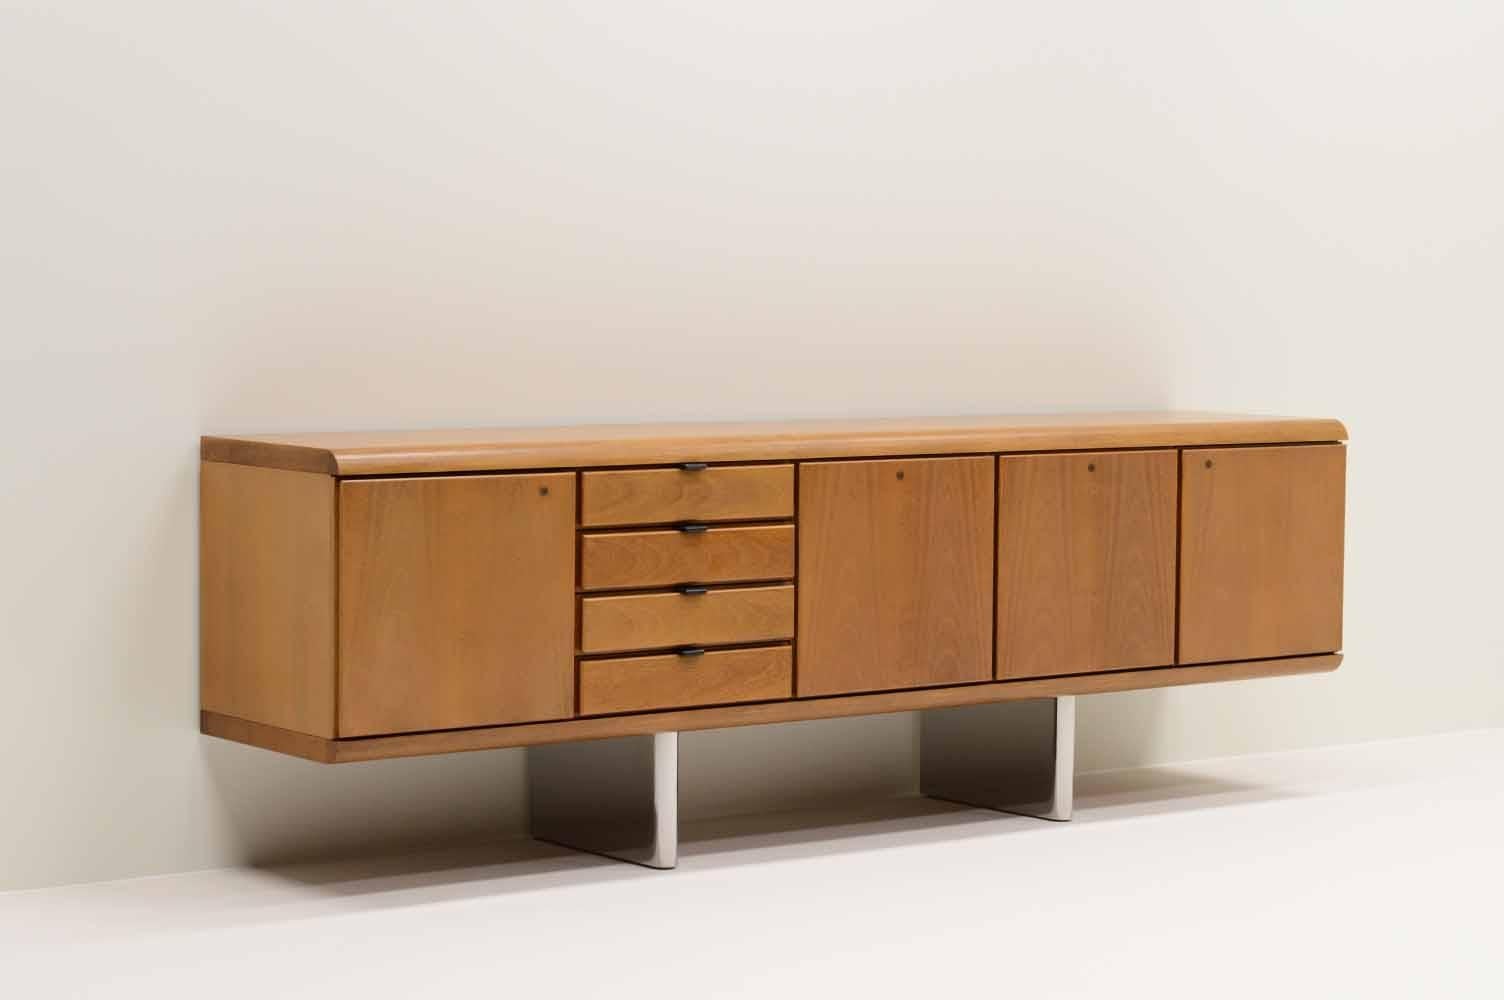 Large mahogany sideboard by Hans von Klier for Skipper, Italy, 1970s. High quality sideboard with stainless steel chrome legs, 4 drawers, 2 doors with glass shelf, large drawer with bar insert and larg drawer for files. Can be used as room divider